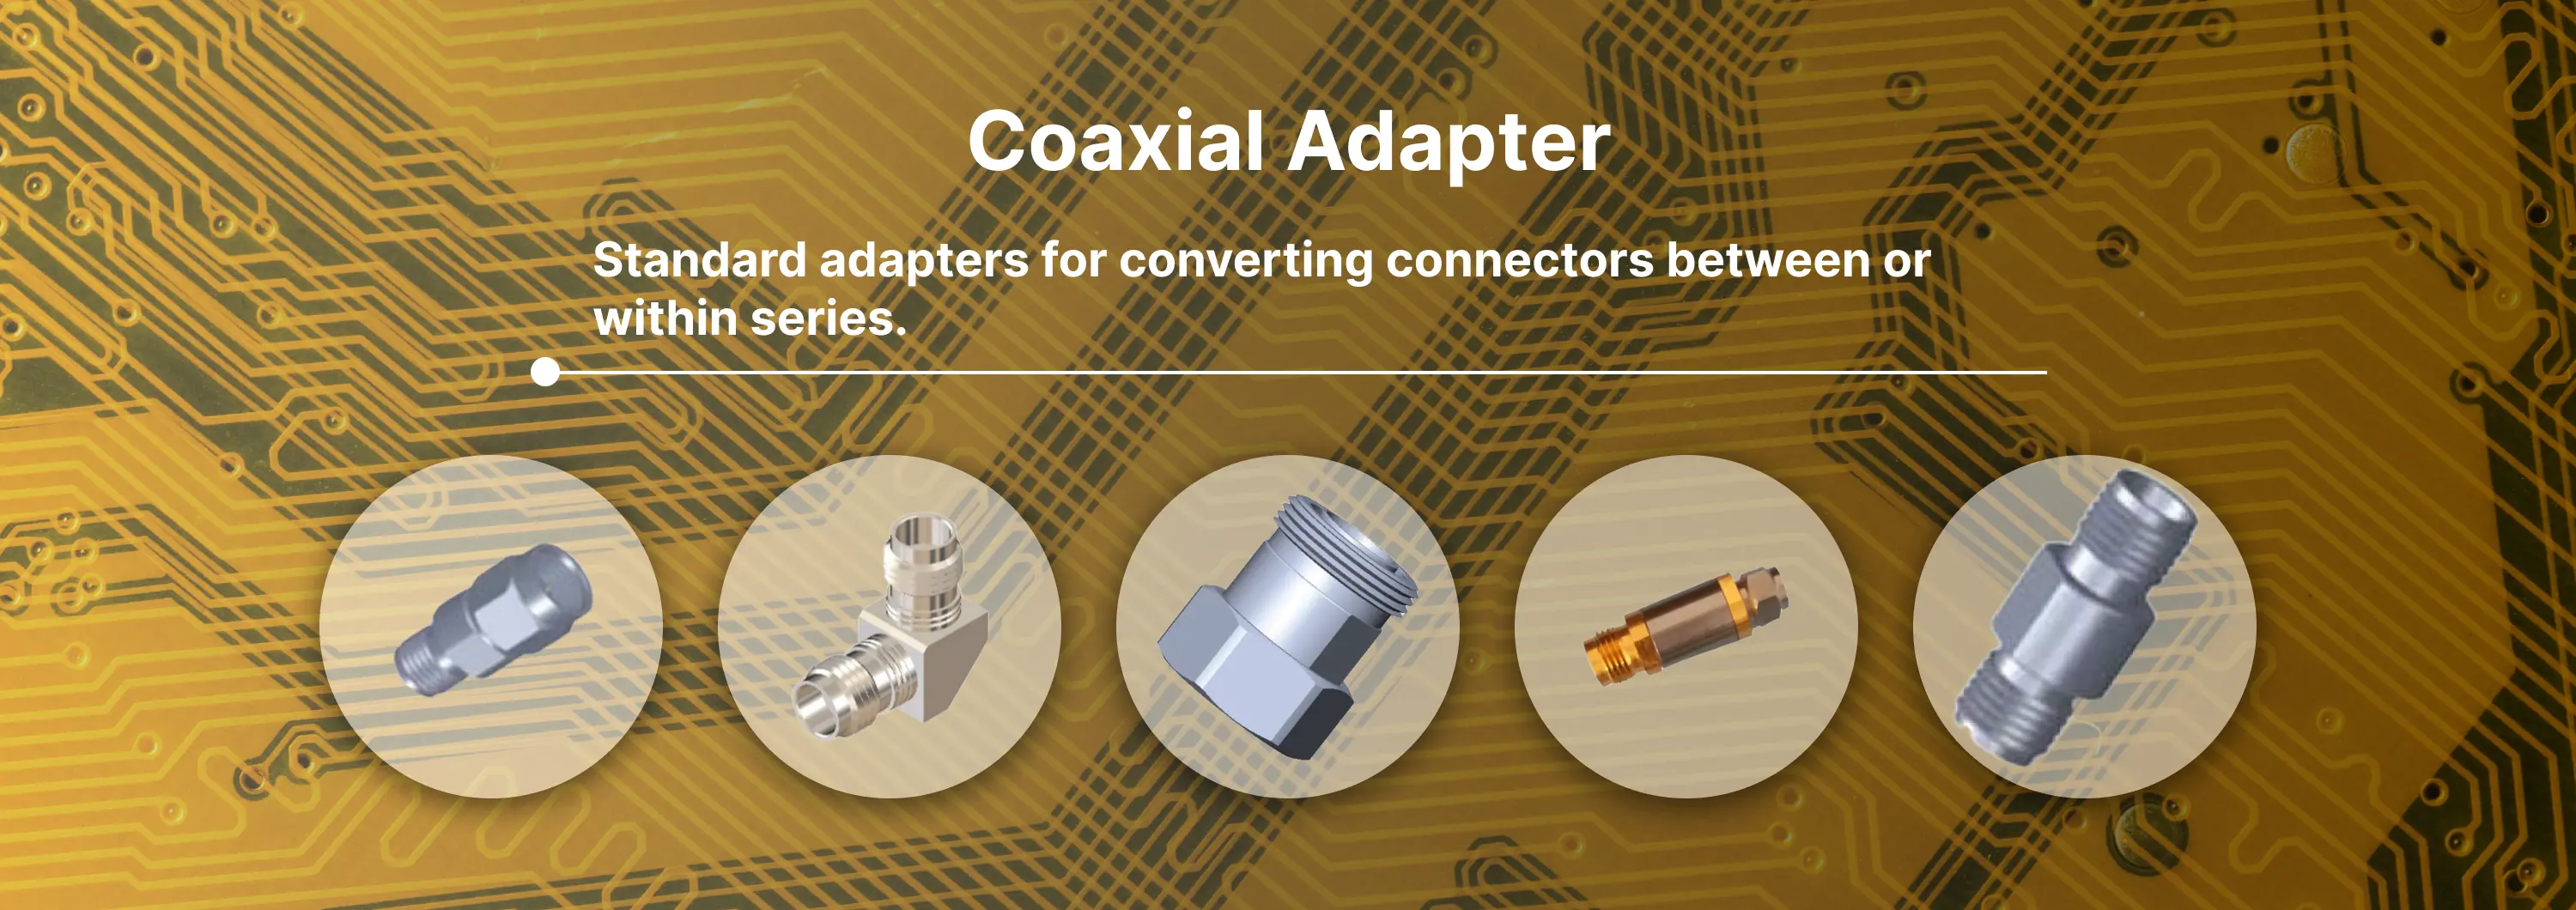 Coaxial Adapter Banner